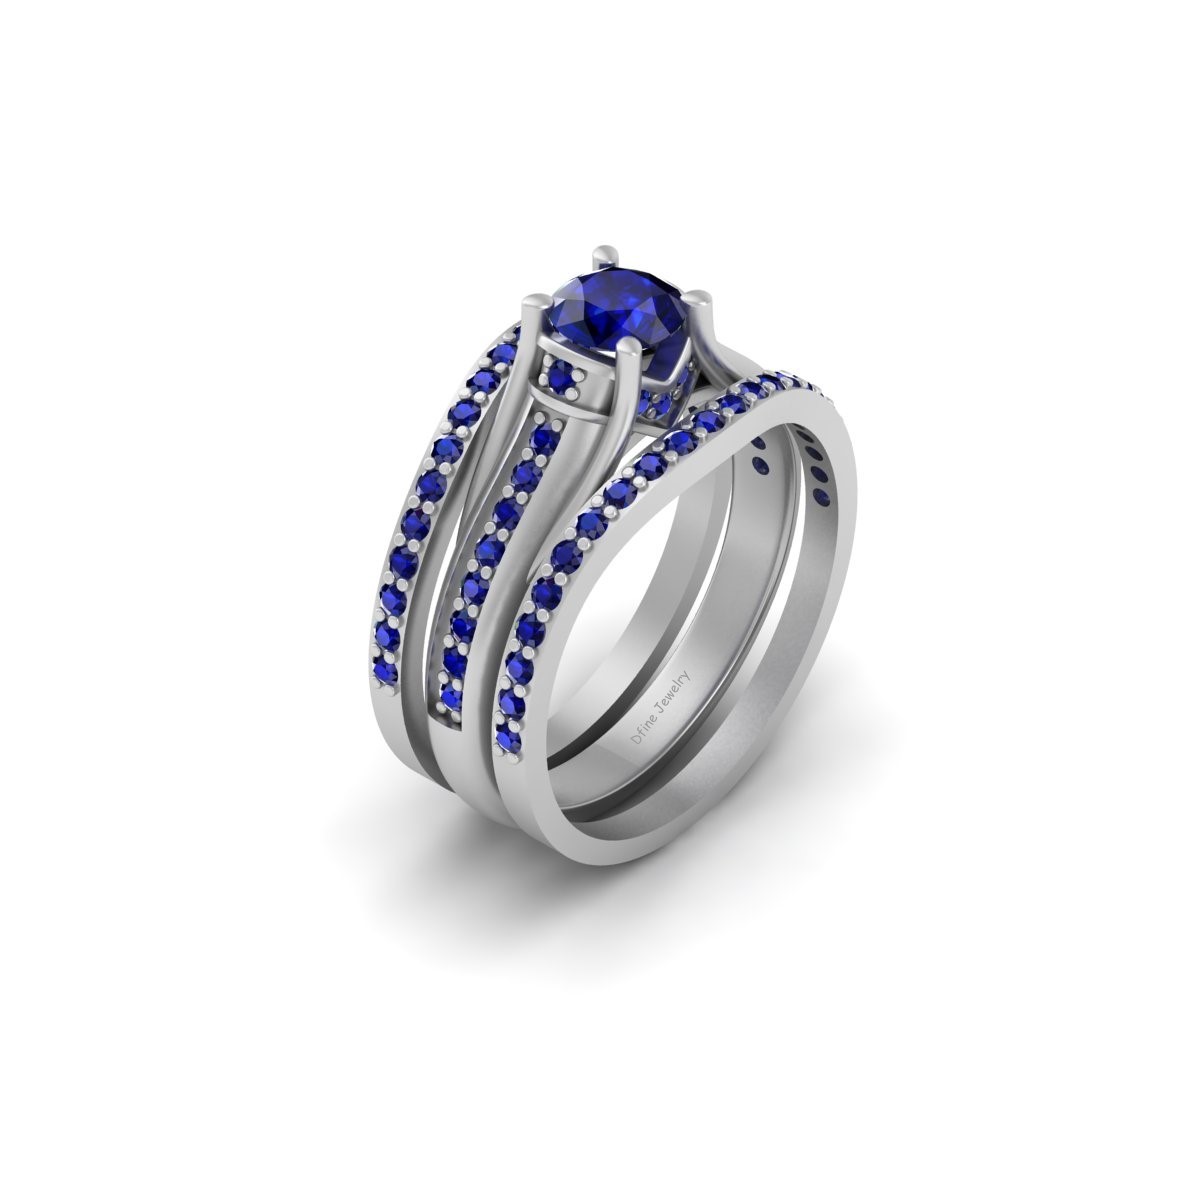 Sapphire Engagement Ring Matching Eternity Band Set star Wars Inspired Jewelry - $1,679.99